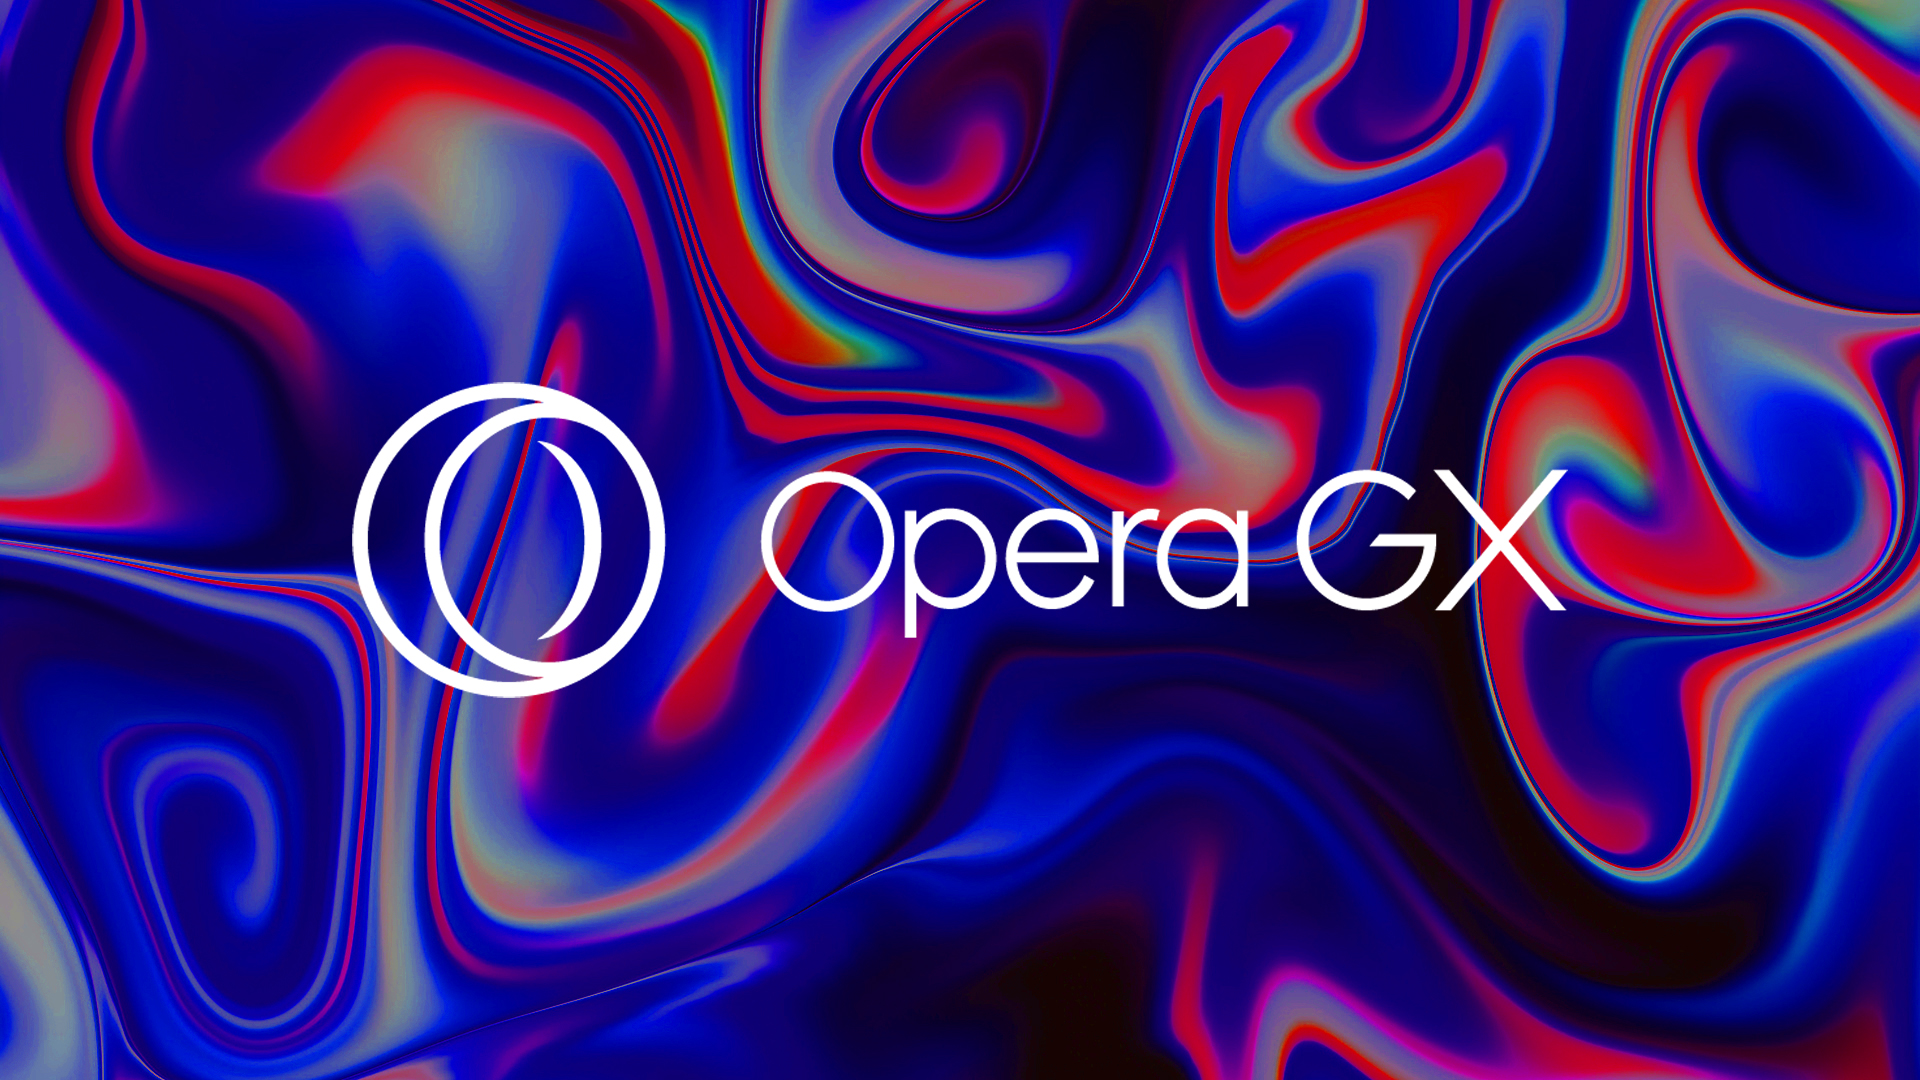 Opera gx review â worth using in